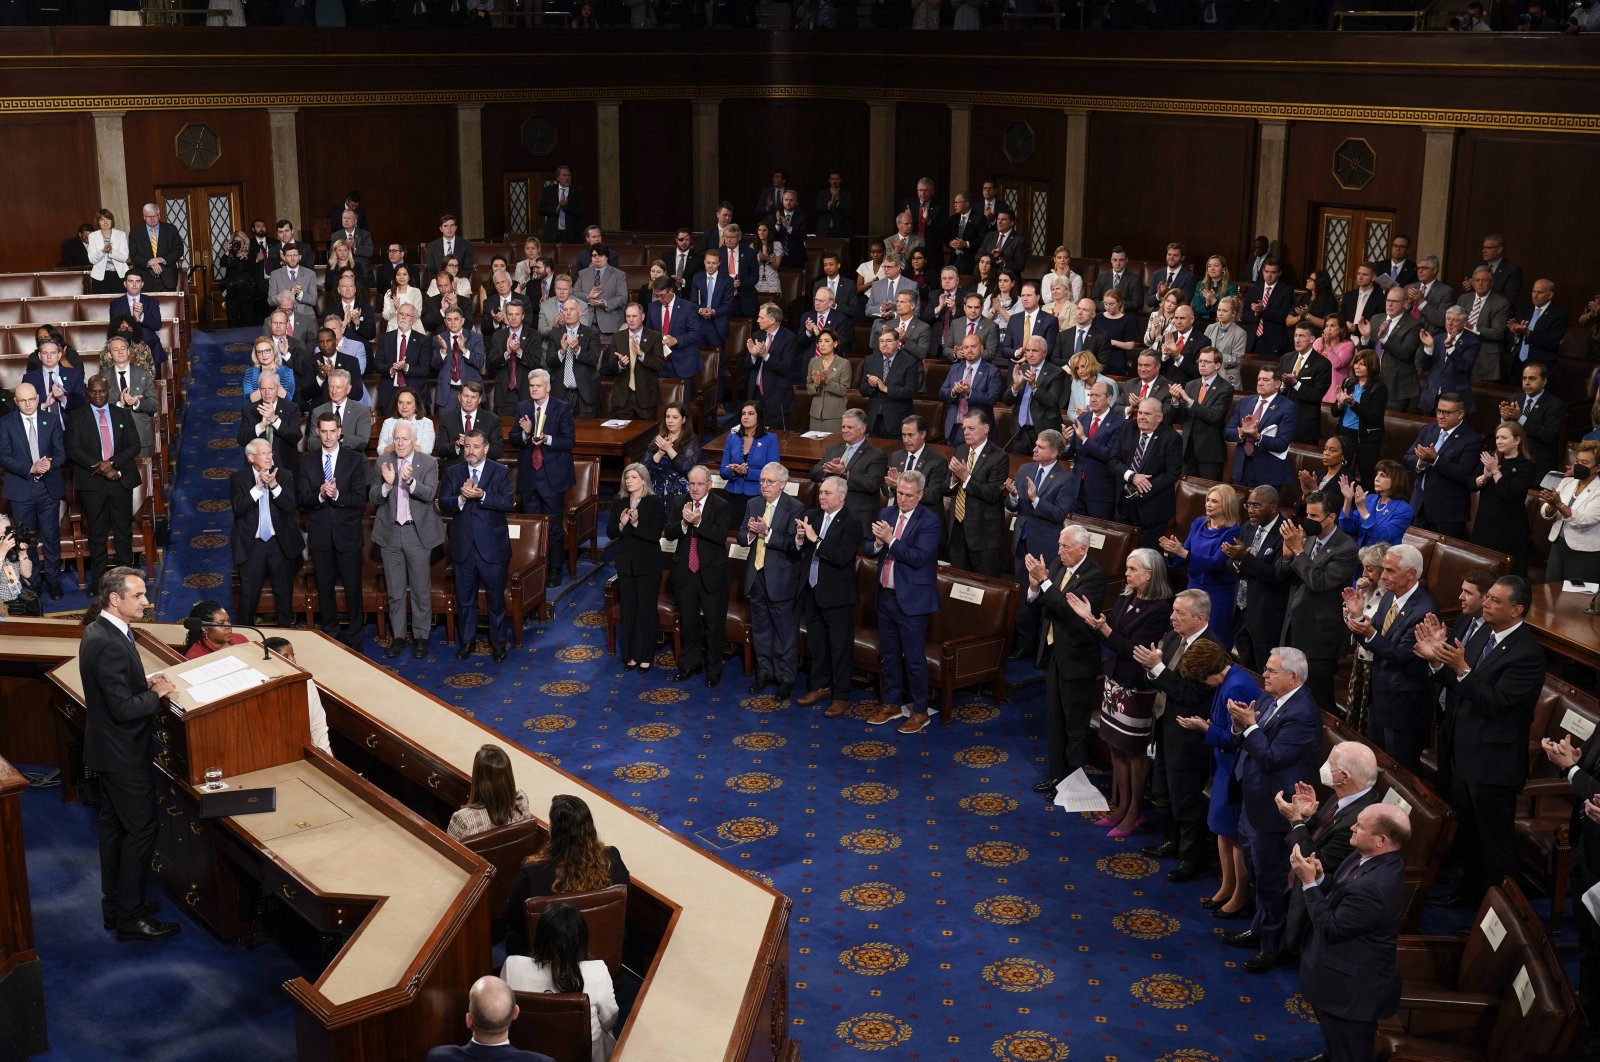 U.S. House and Senate members stand and applaud Greek Prime Minister Kyriakos Mitsotakis during a speech in Washington, D.C., U.S., May 17, 2022. (AP Photo)